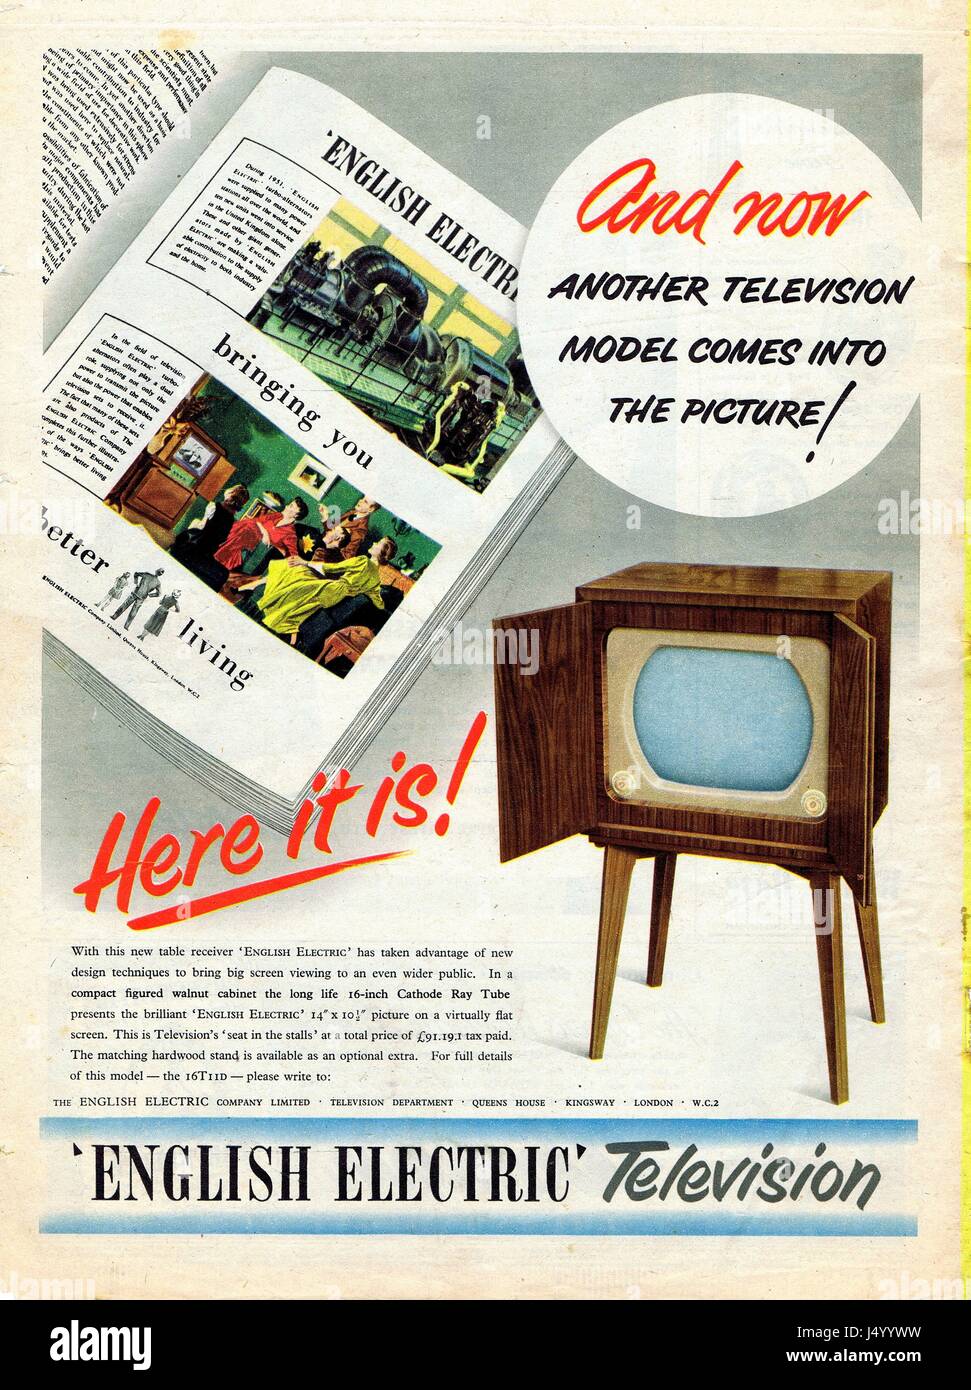 English Electric Television Advertisement 1953. Stock Photo